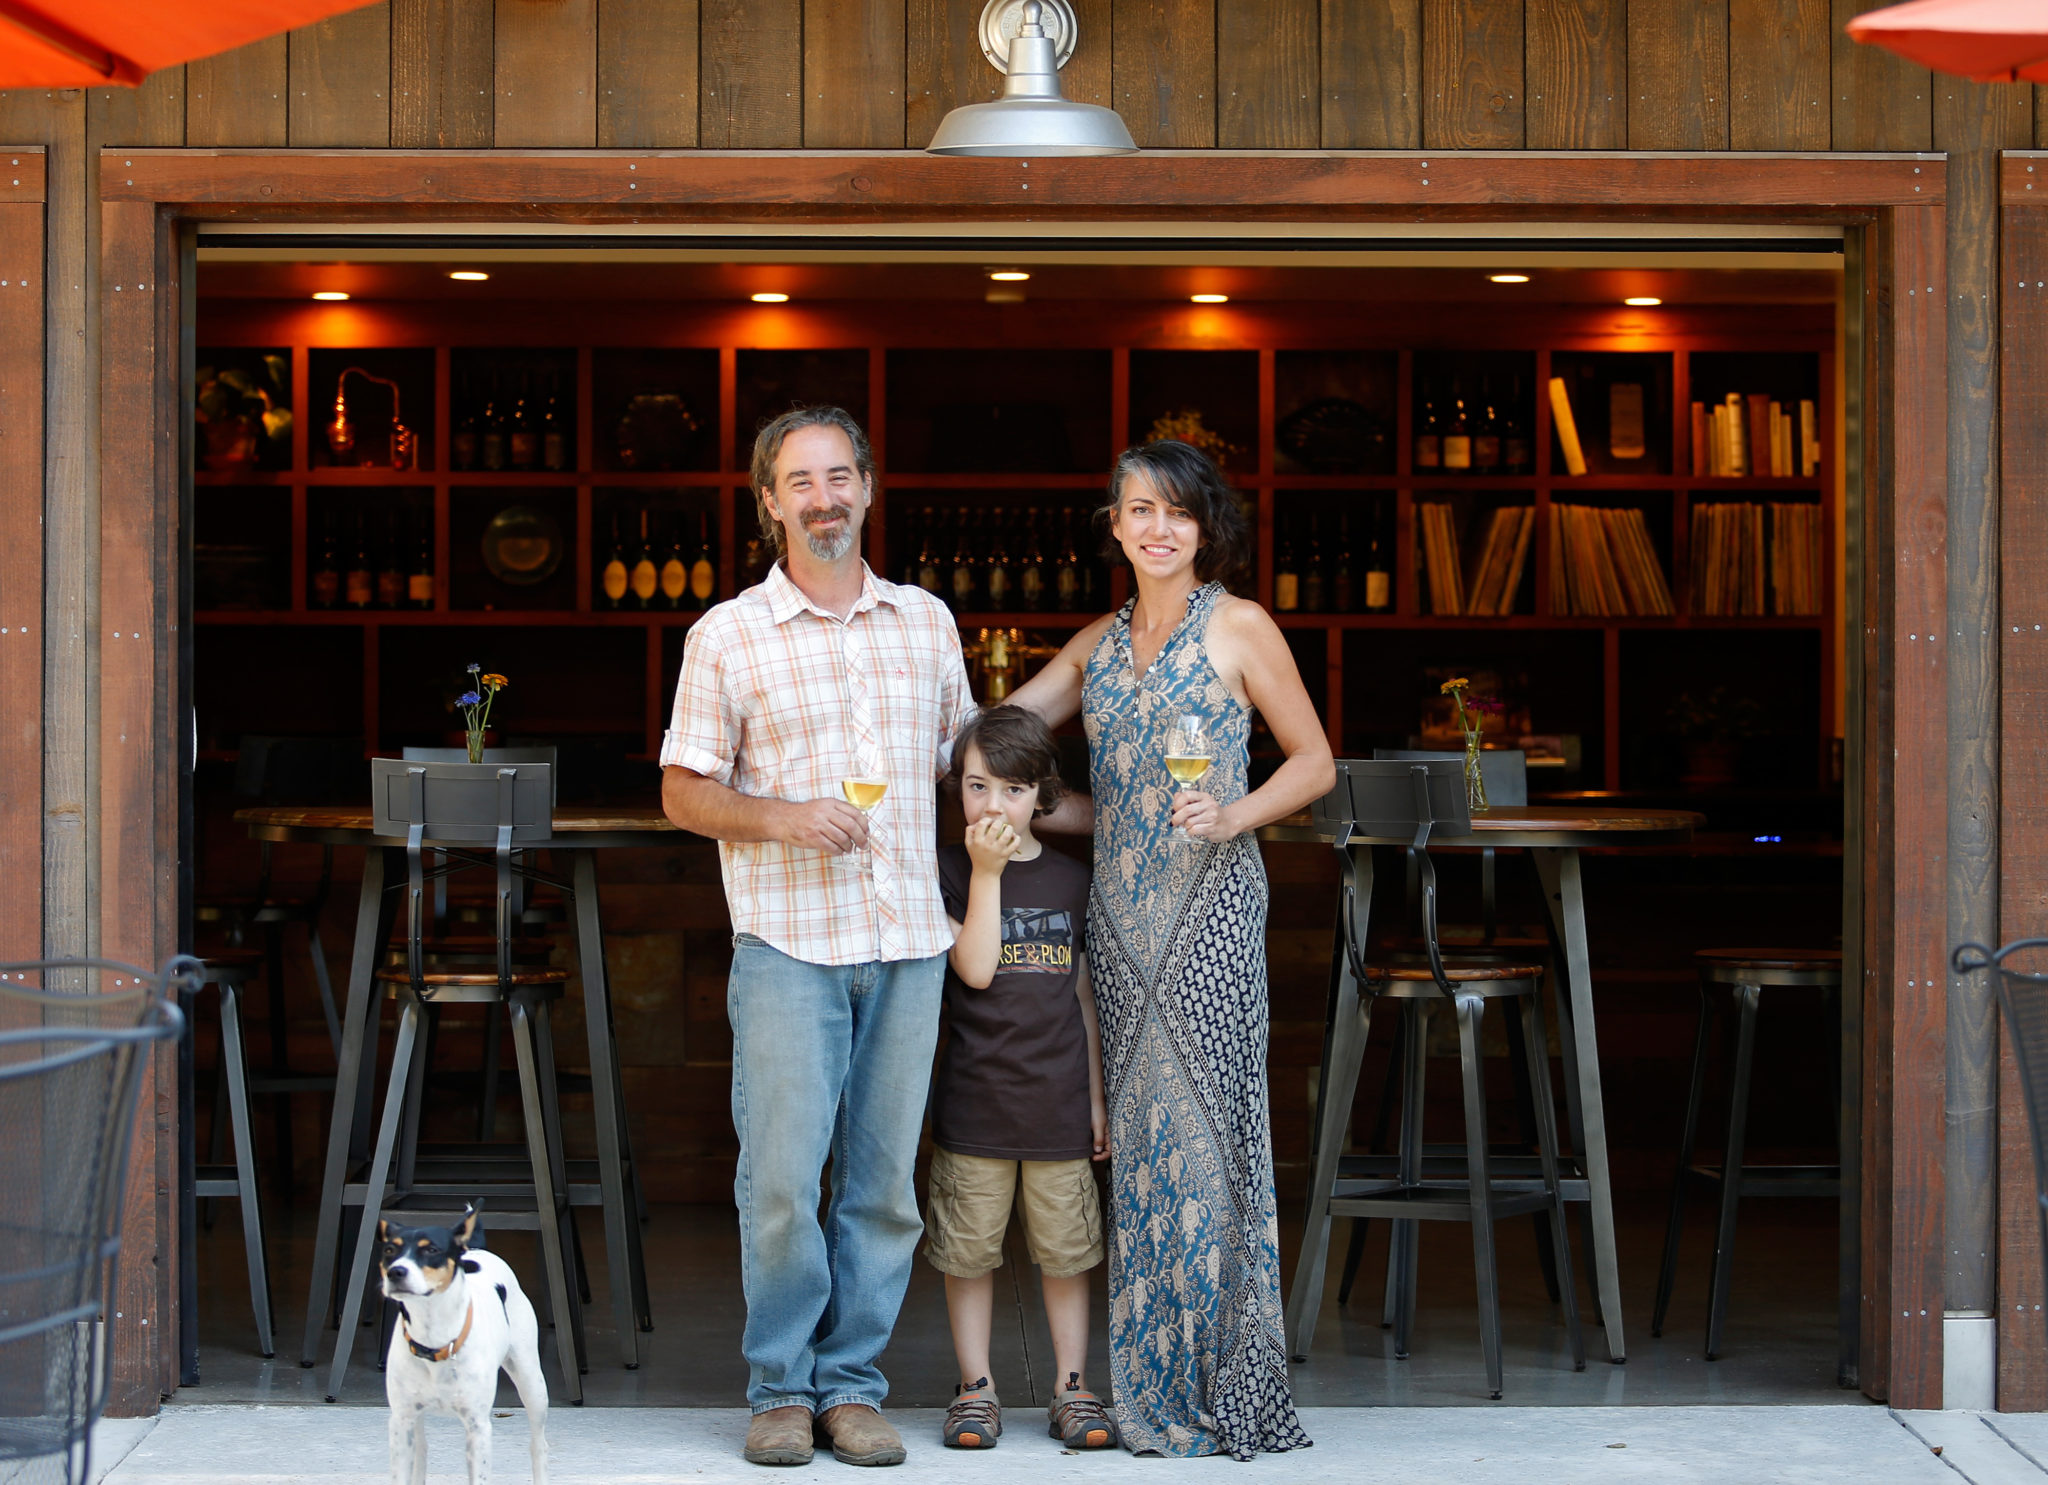 Horse and Plow winery owners and cidermakers Chris Condos and Suzanne Hagins with their son Dean Condos and family dog Pepita, at Horse and Plow winery in Sebastopol, California on Wednesday, July 27, 2016. (Alvin Jornada / The Press Democrat)